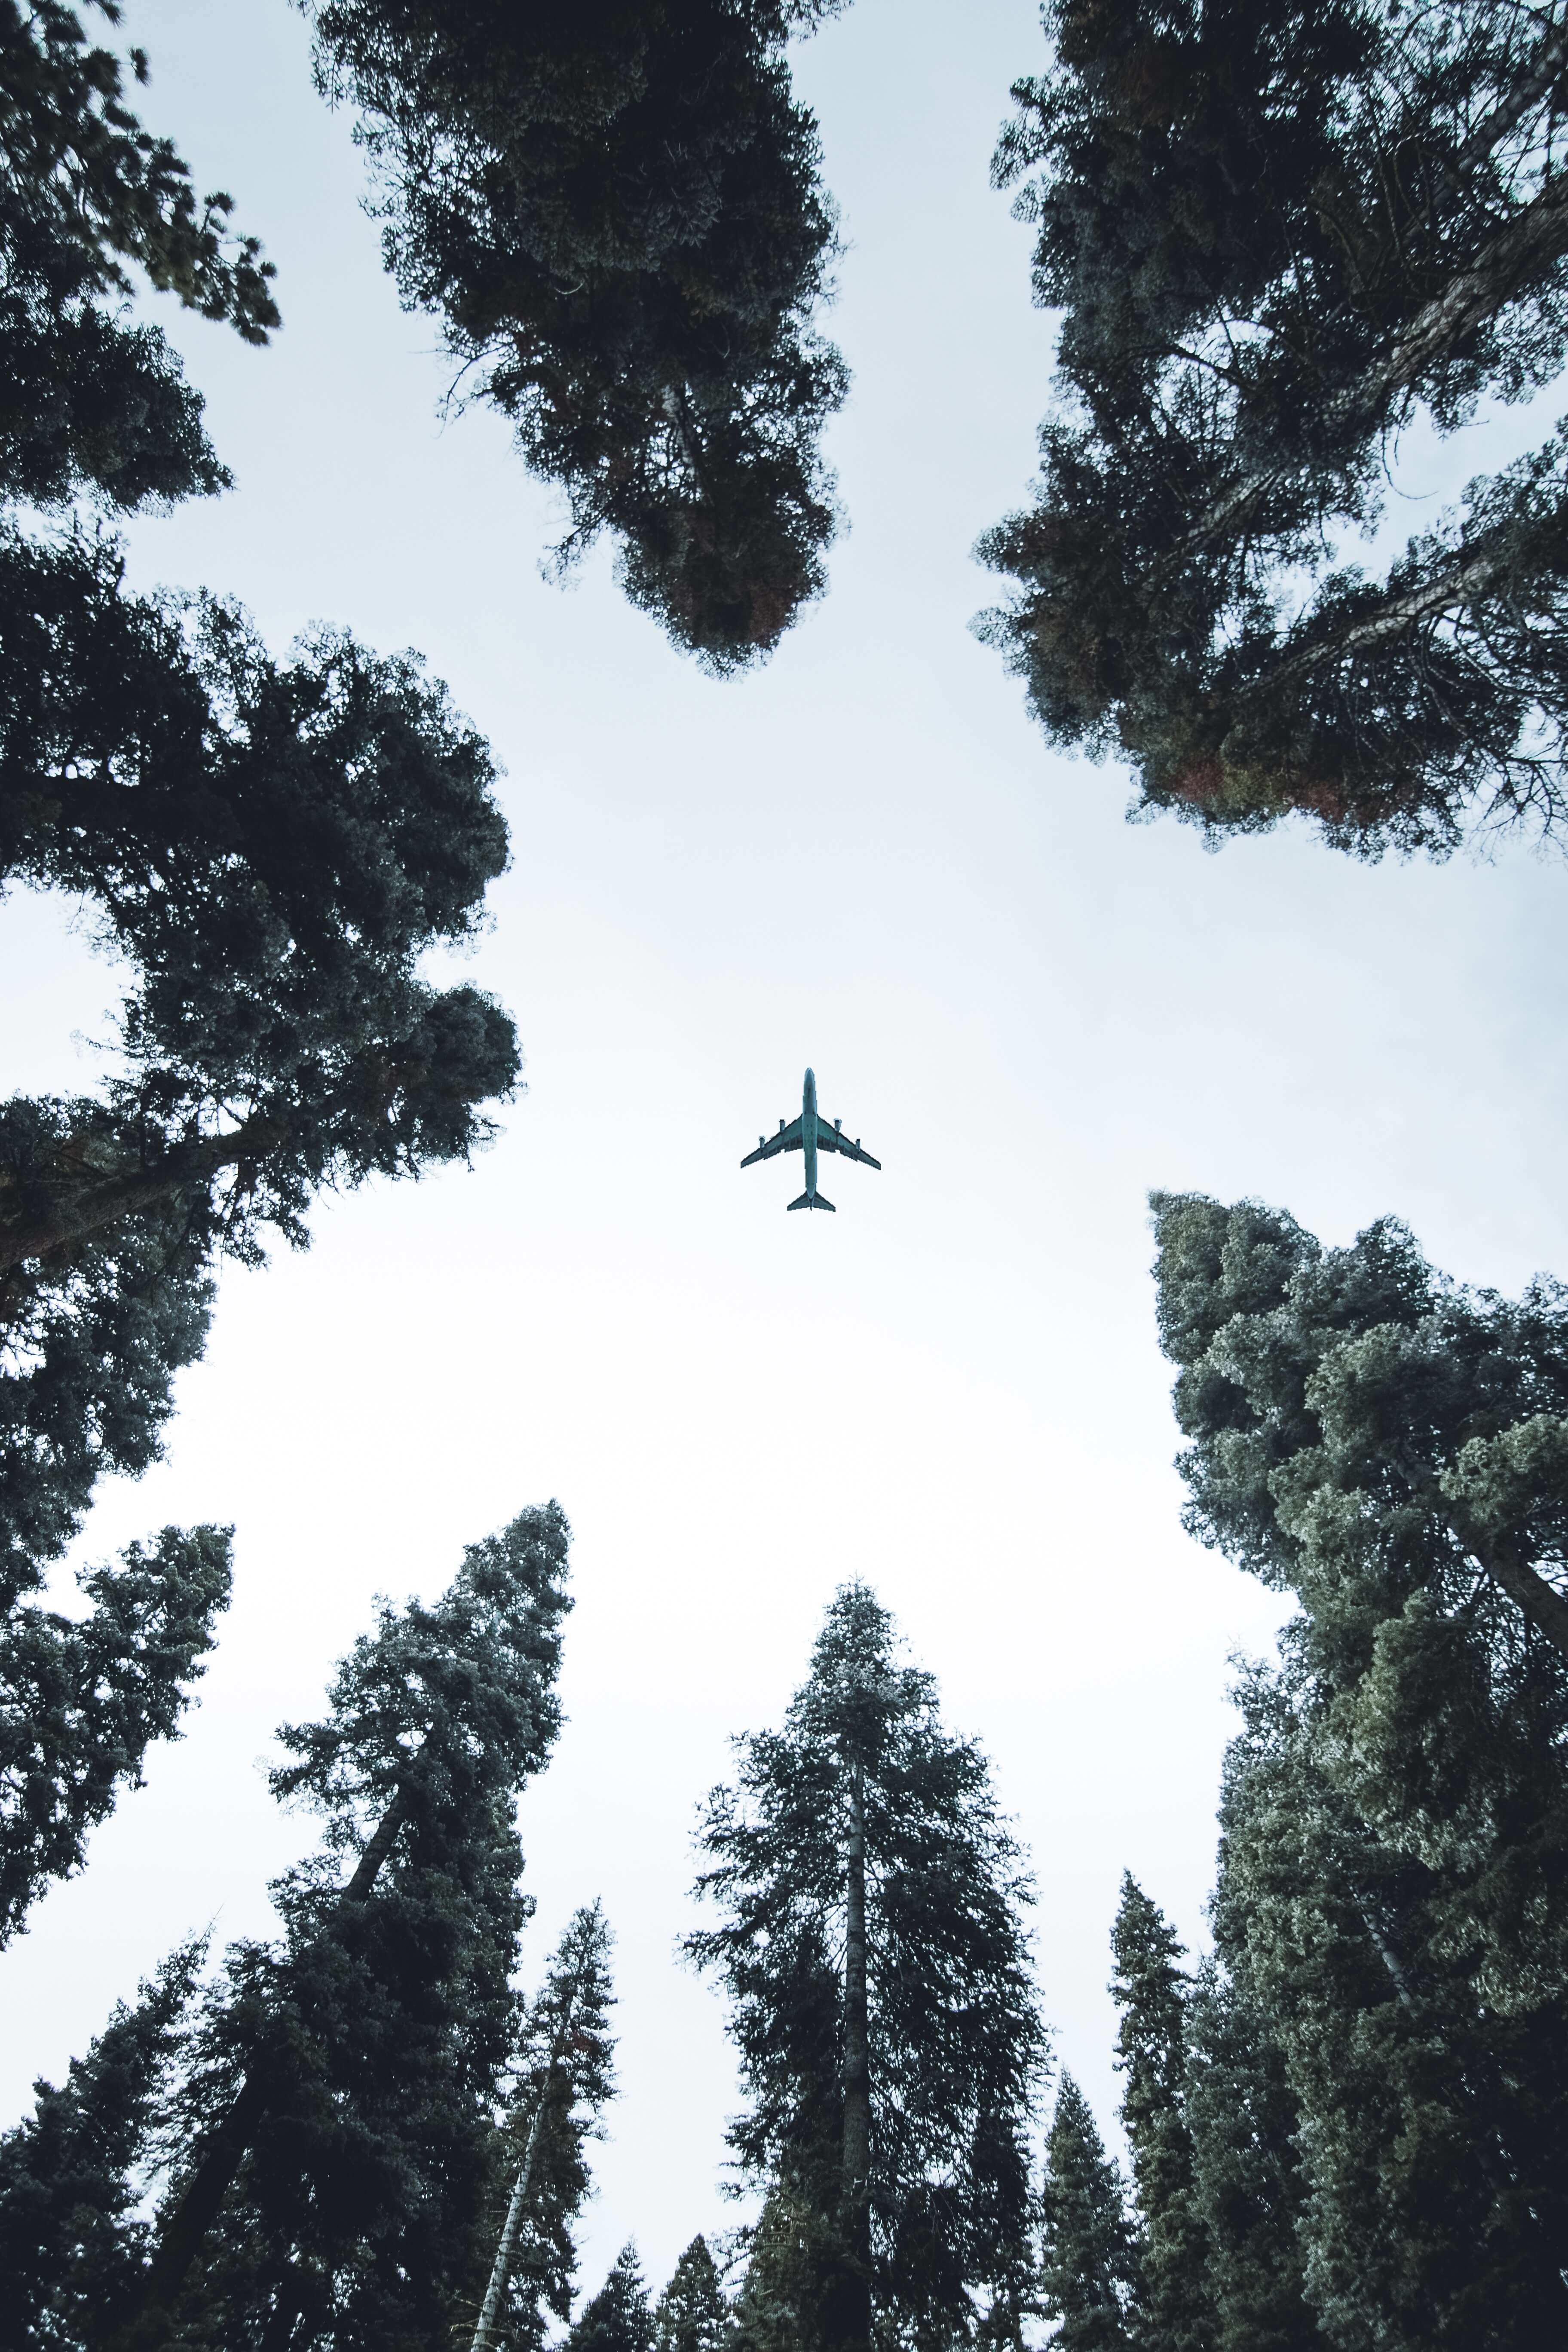 An airplane flies overhead with several trees rising up toward the sky.